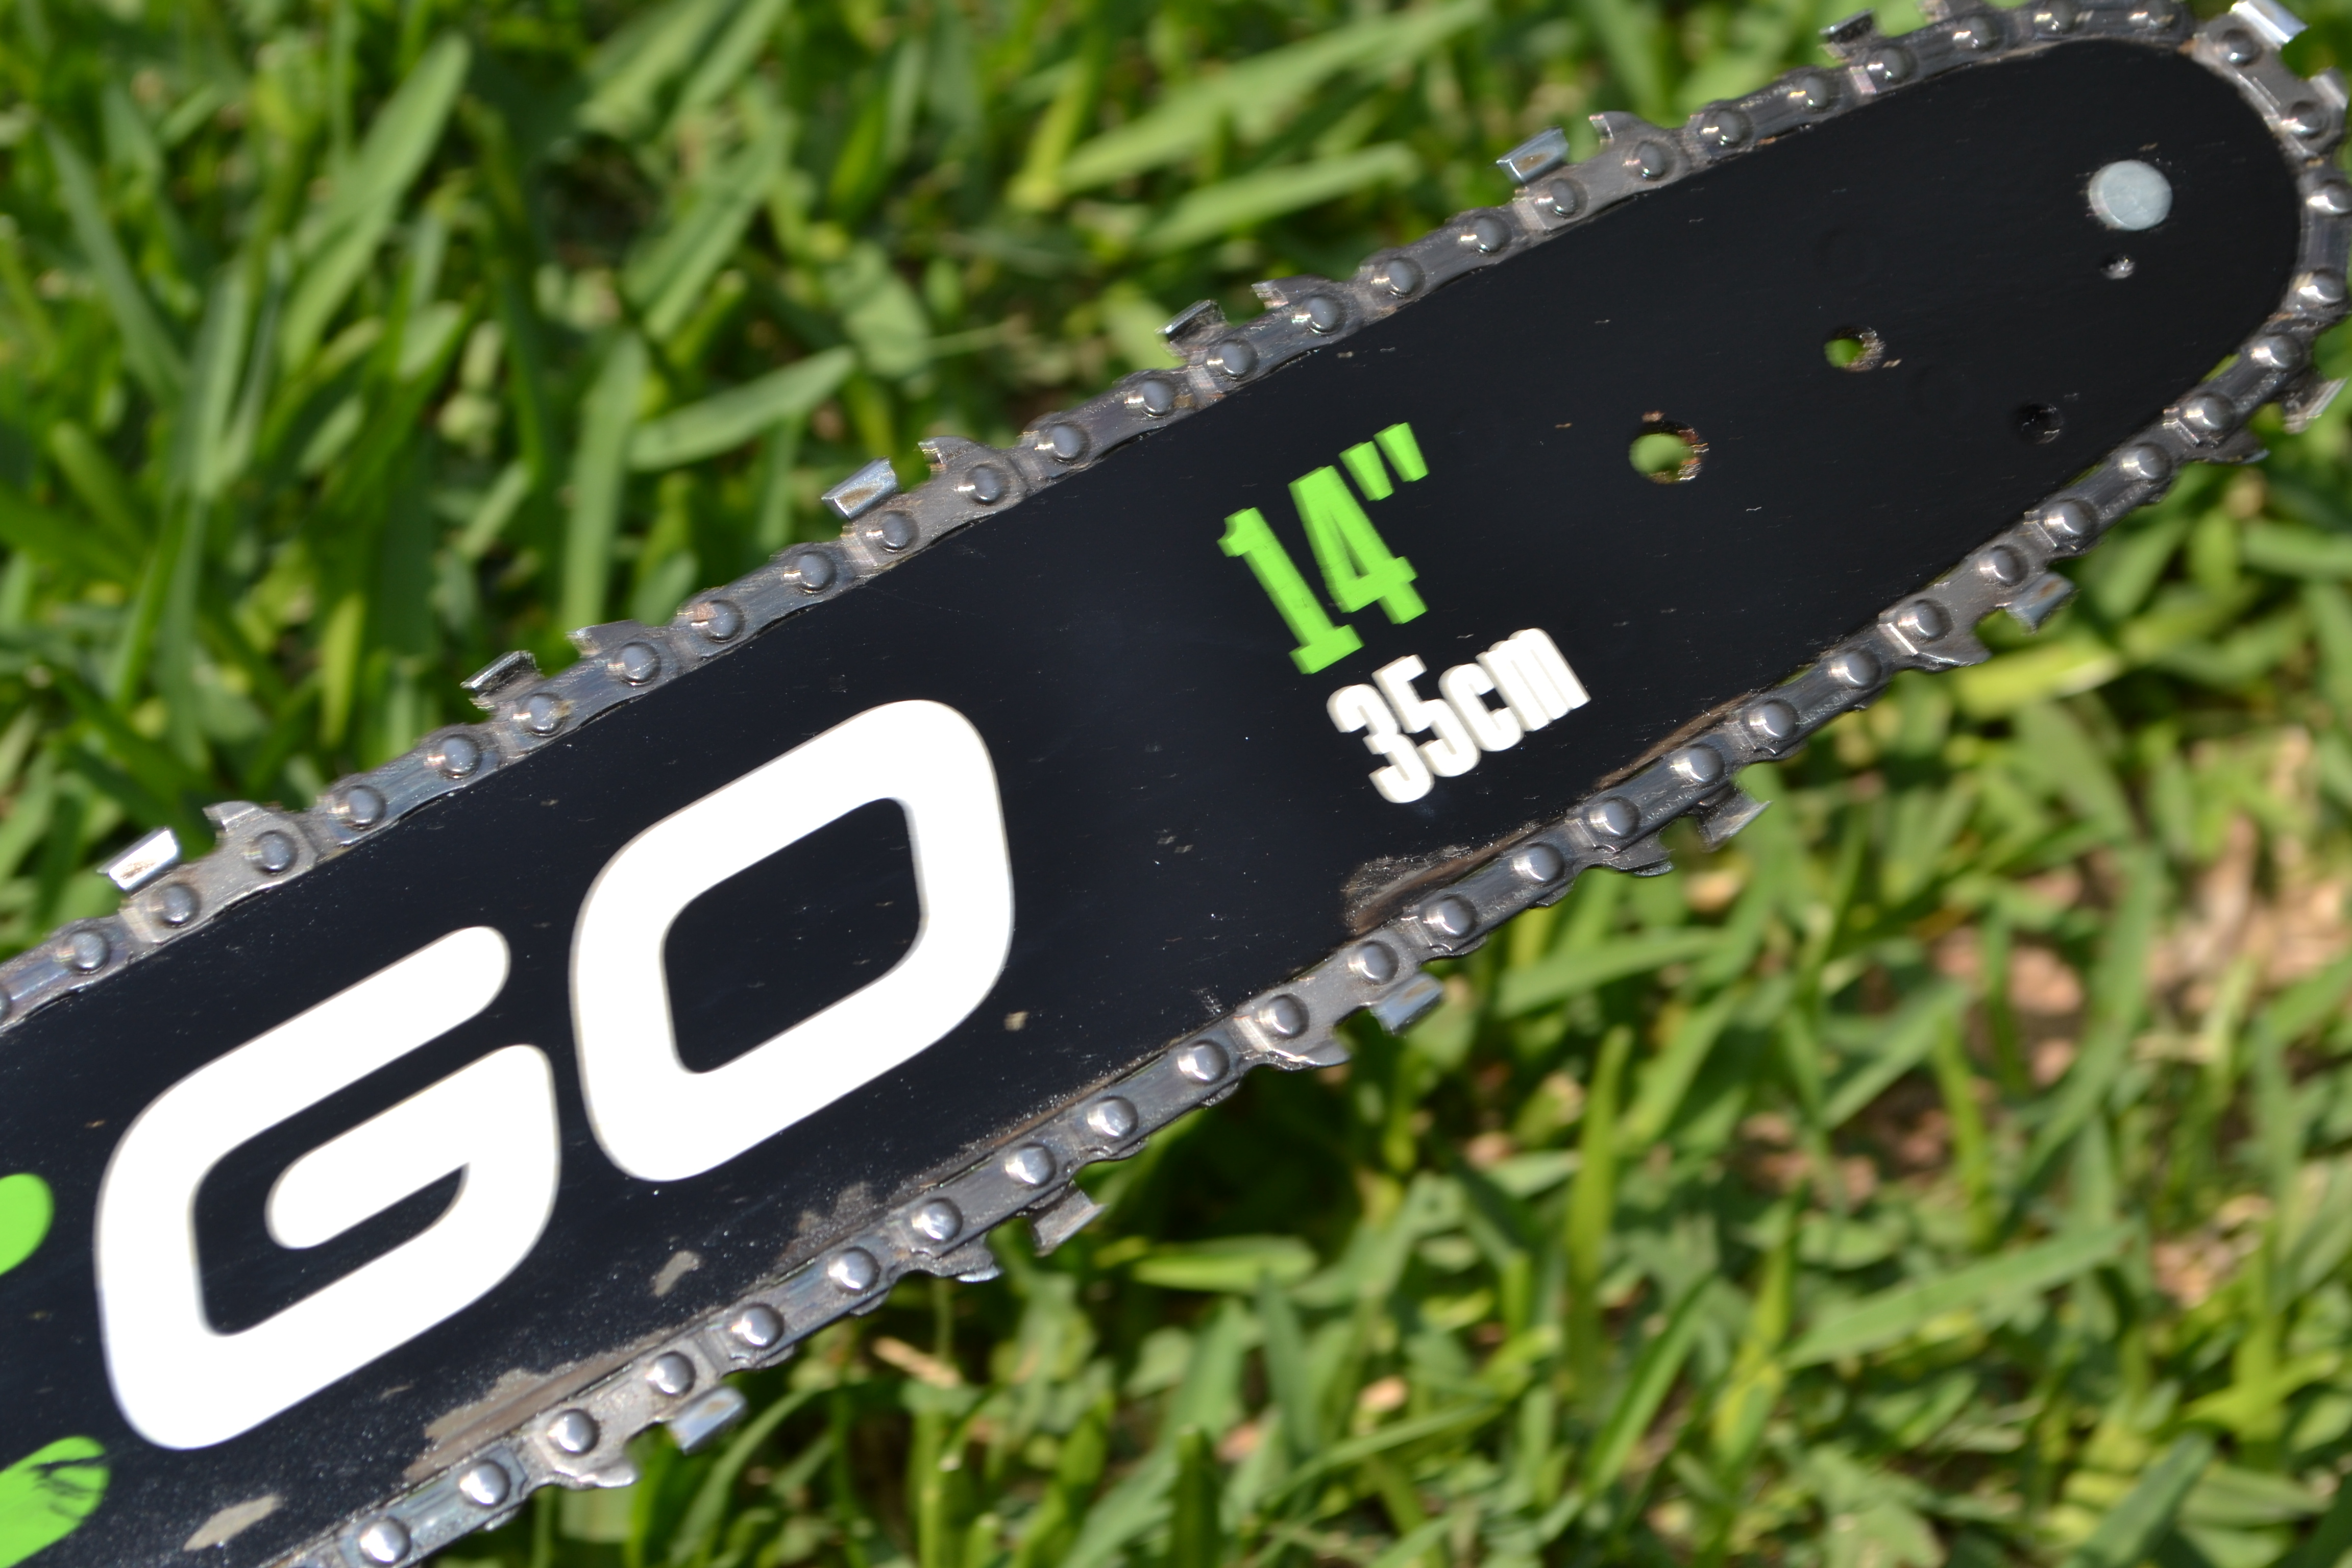 EGO Chainsaw Review 